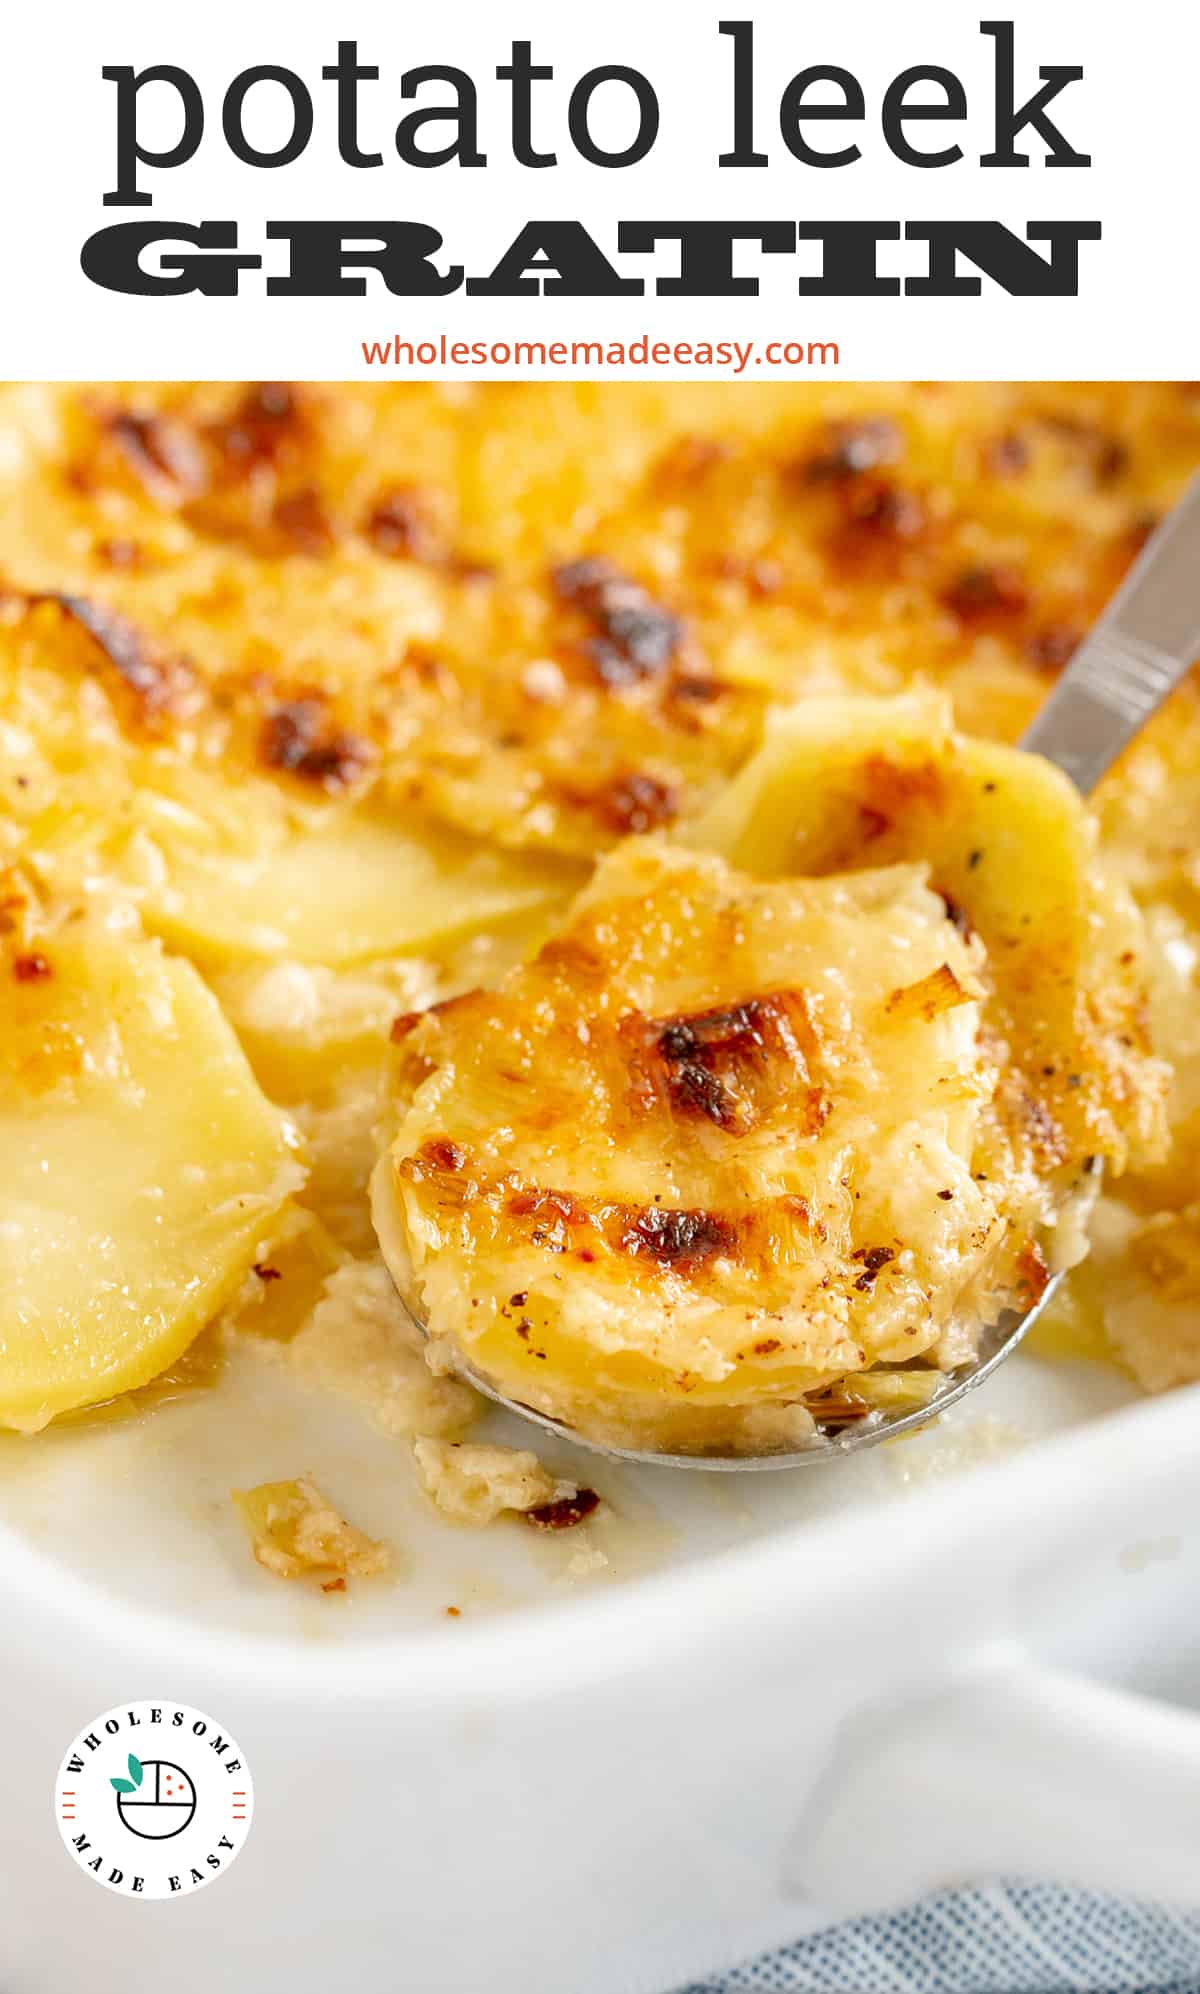 A spoon scoops up some Potato Leek Gratin from a baking dish.